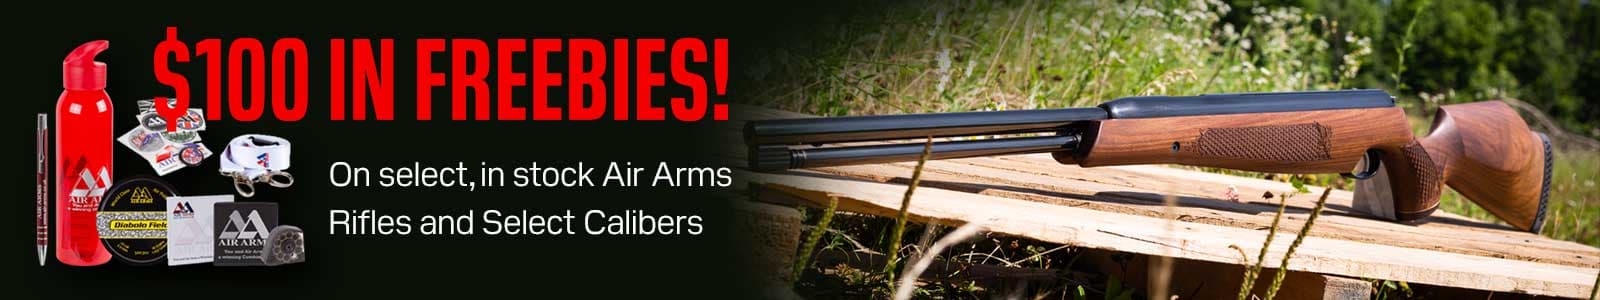 Up to $100 in Freebies on Select Air Arms